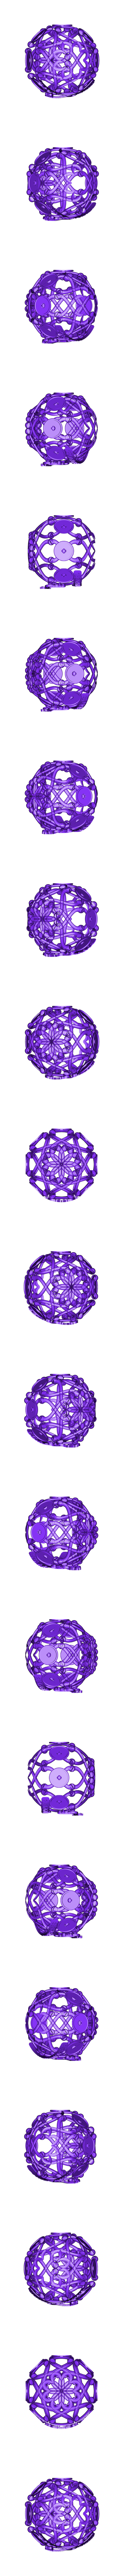 boule_an_perso01.STL Download free STL file Decorative ball of the new year V.1 • 3D printer model, Tibe-Design